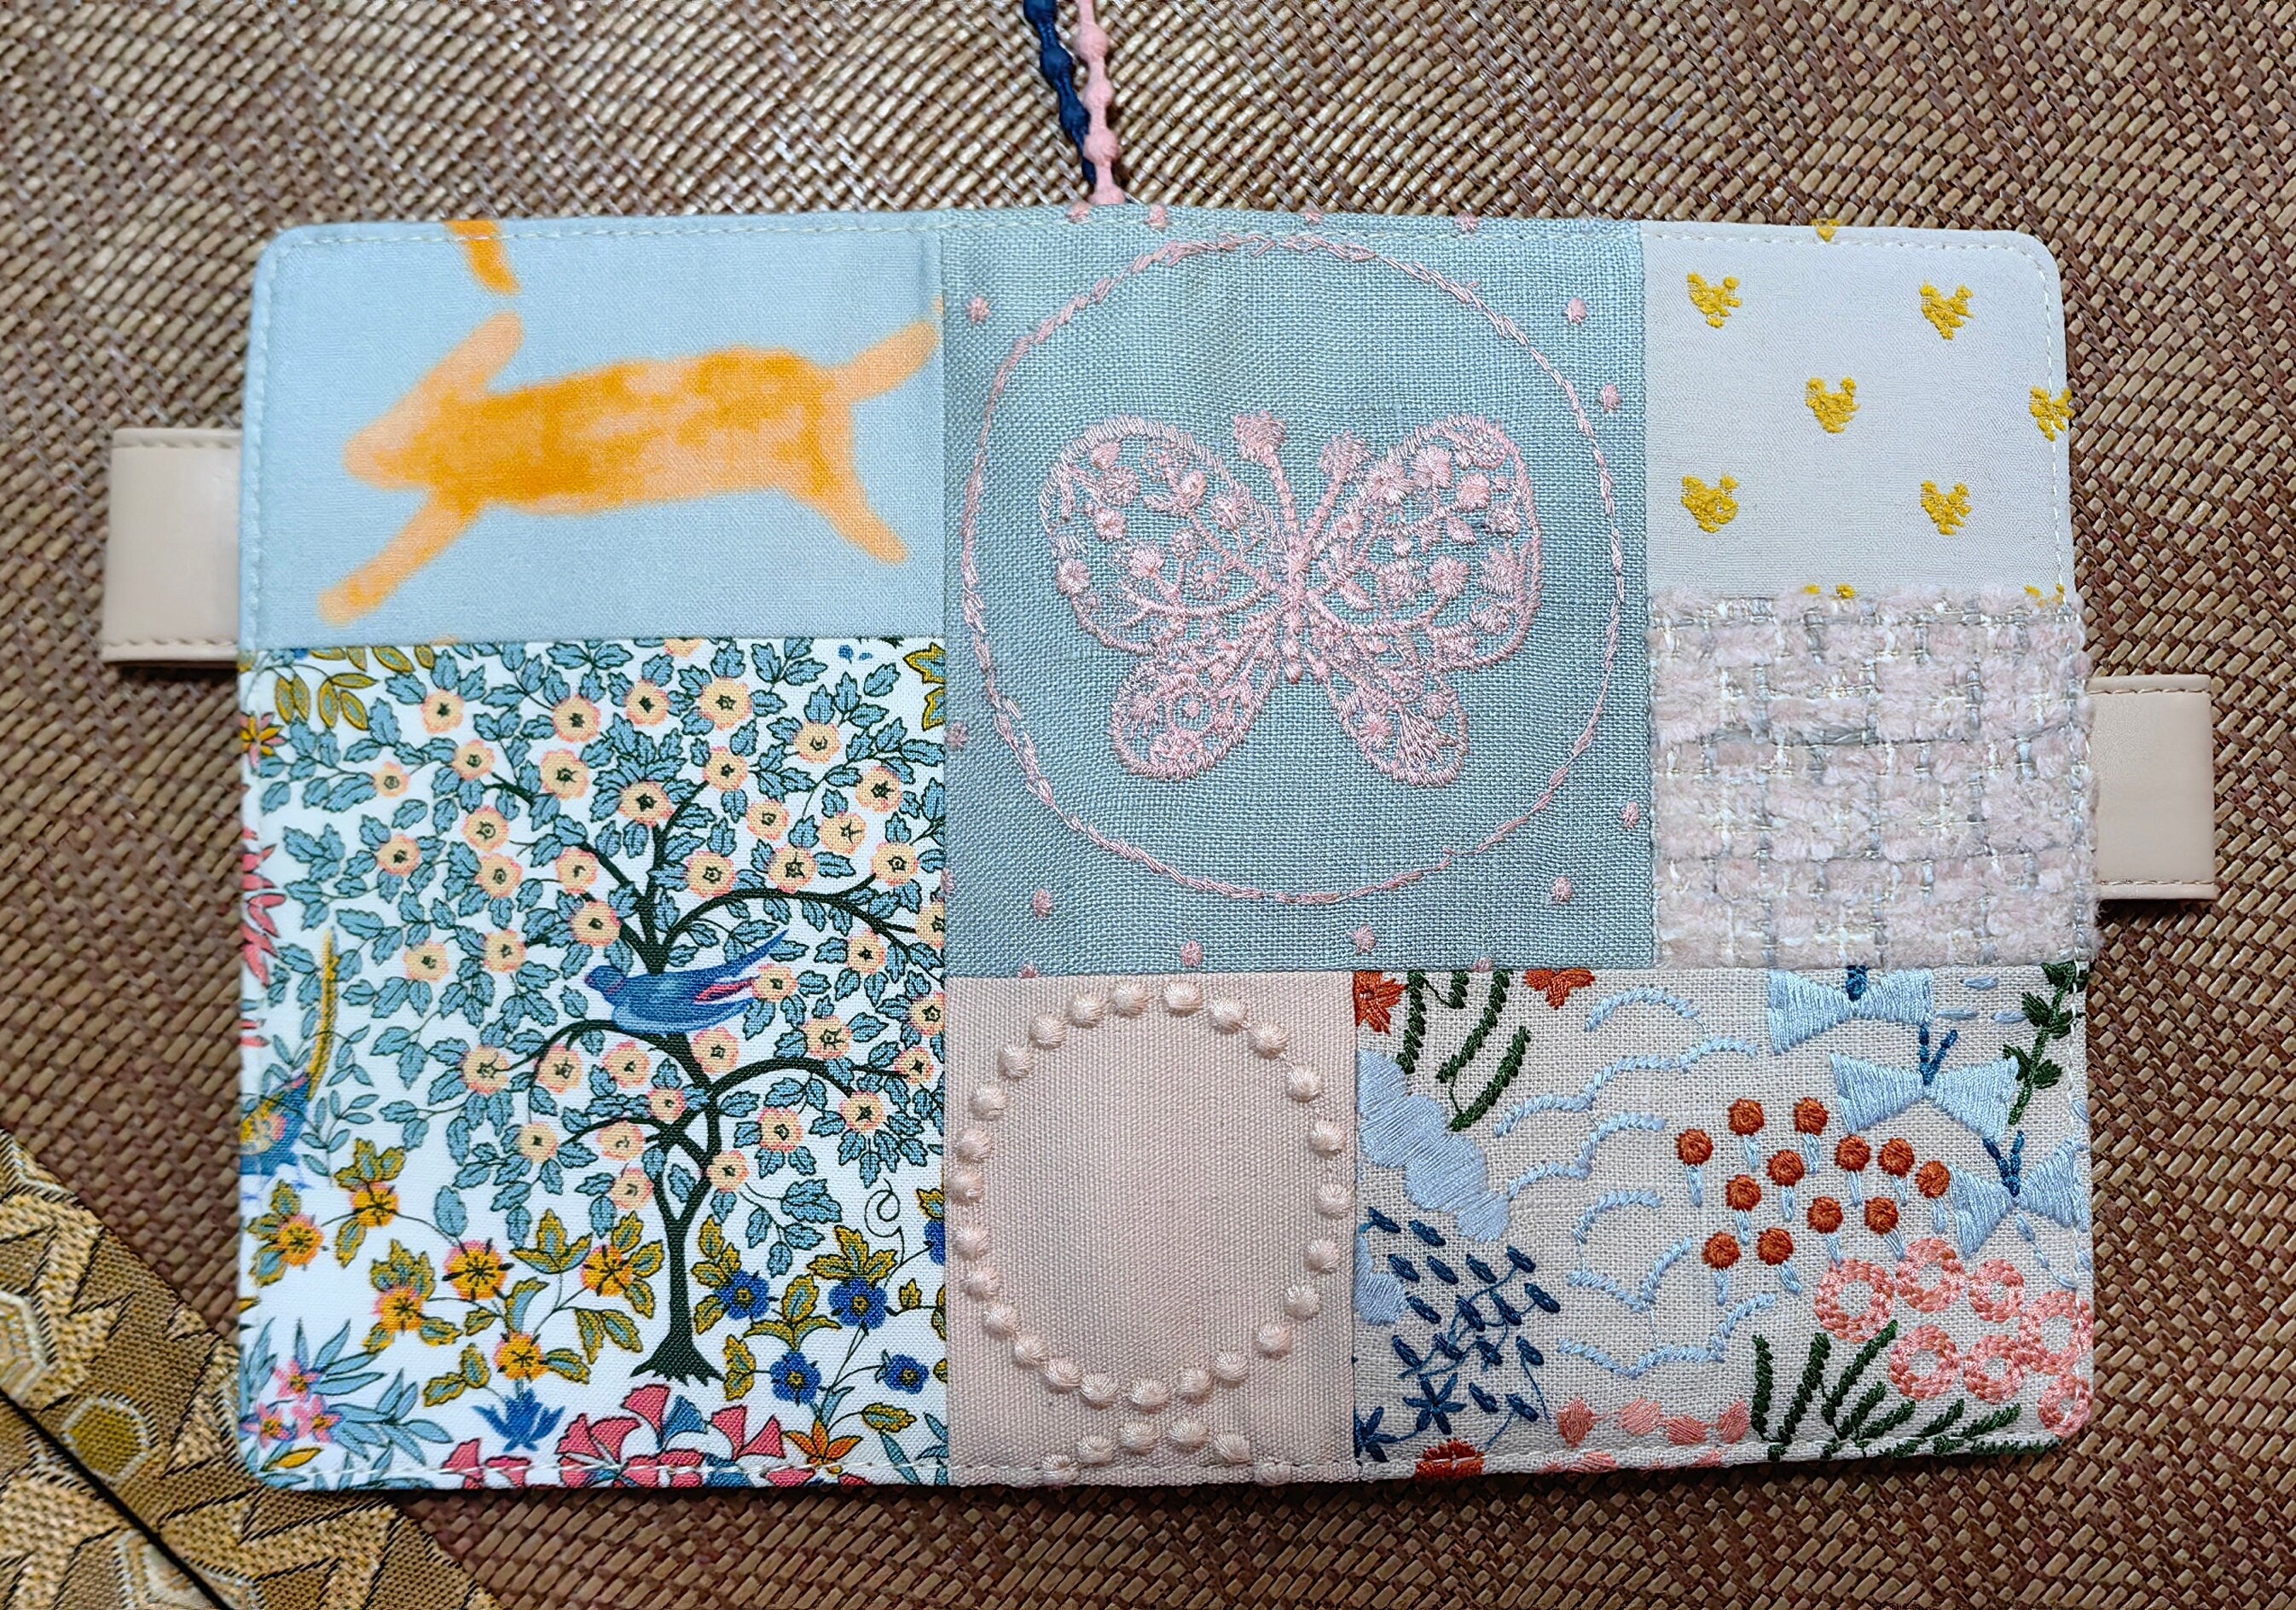 Fog Blue Garden Embroidery Notebook Journal Cover Handmade Patchwork A5 A6 B6 Butterfly Rabbit Tree Flower Fabric-Leather Planner Diary Gift